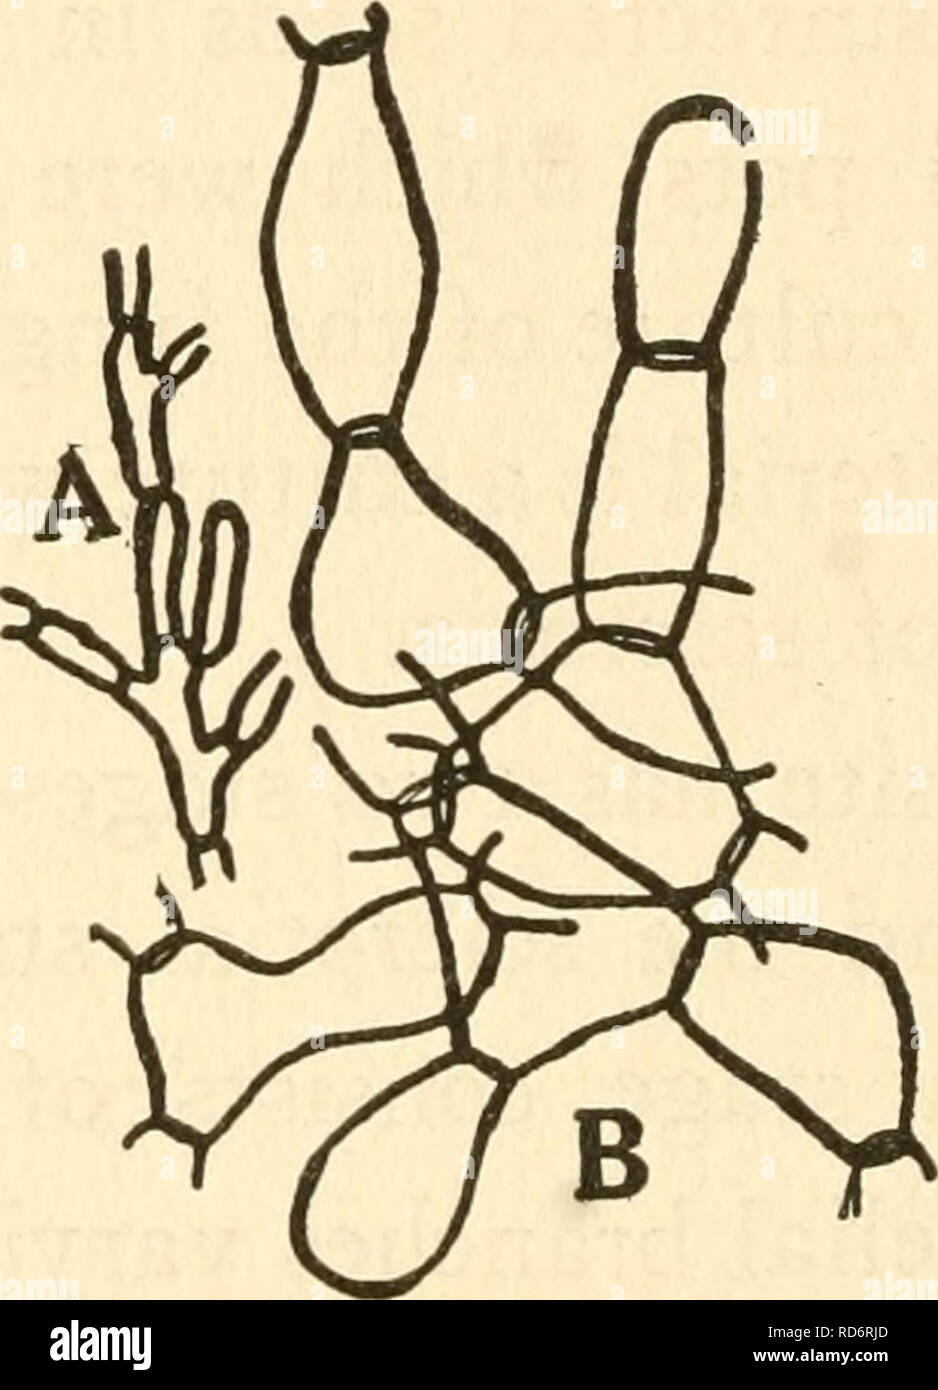 . The culture and diseases of the sweet pea. Sweet peas; Sweet peas. 102 DISEASES OF THE SWEET PEA numerous sclerotia which are made up of closely interwoven short barrel-shaped hyphae (fig. jb).. fig. 7. a young hyphce of Rhizoctonia from sweet pea. b barrel-shaped hyphce from sclerotia OF the same FUNGUS. Rhizoctonia solani Kuhn produces only micro or small sclerotia, whereas Corticium vagum B. and C. produces macro or large sclerotia. After repeated attempts the Corticium or perfect stage of the sweet pea Rhizoctonia could not be obtained in pure culture. This accords with the findings of.  Stock Photo